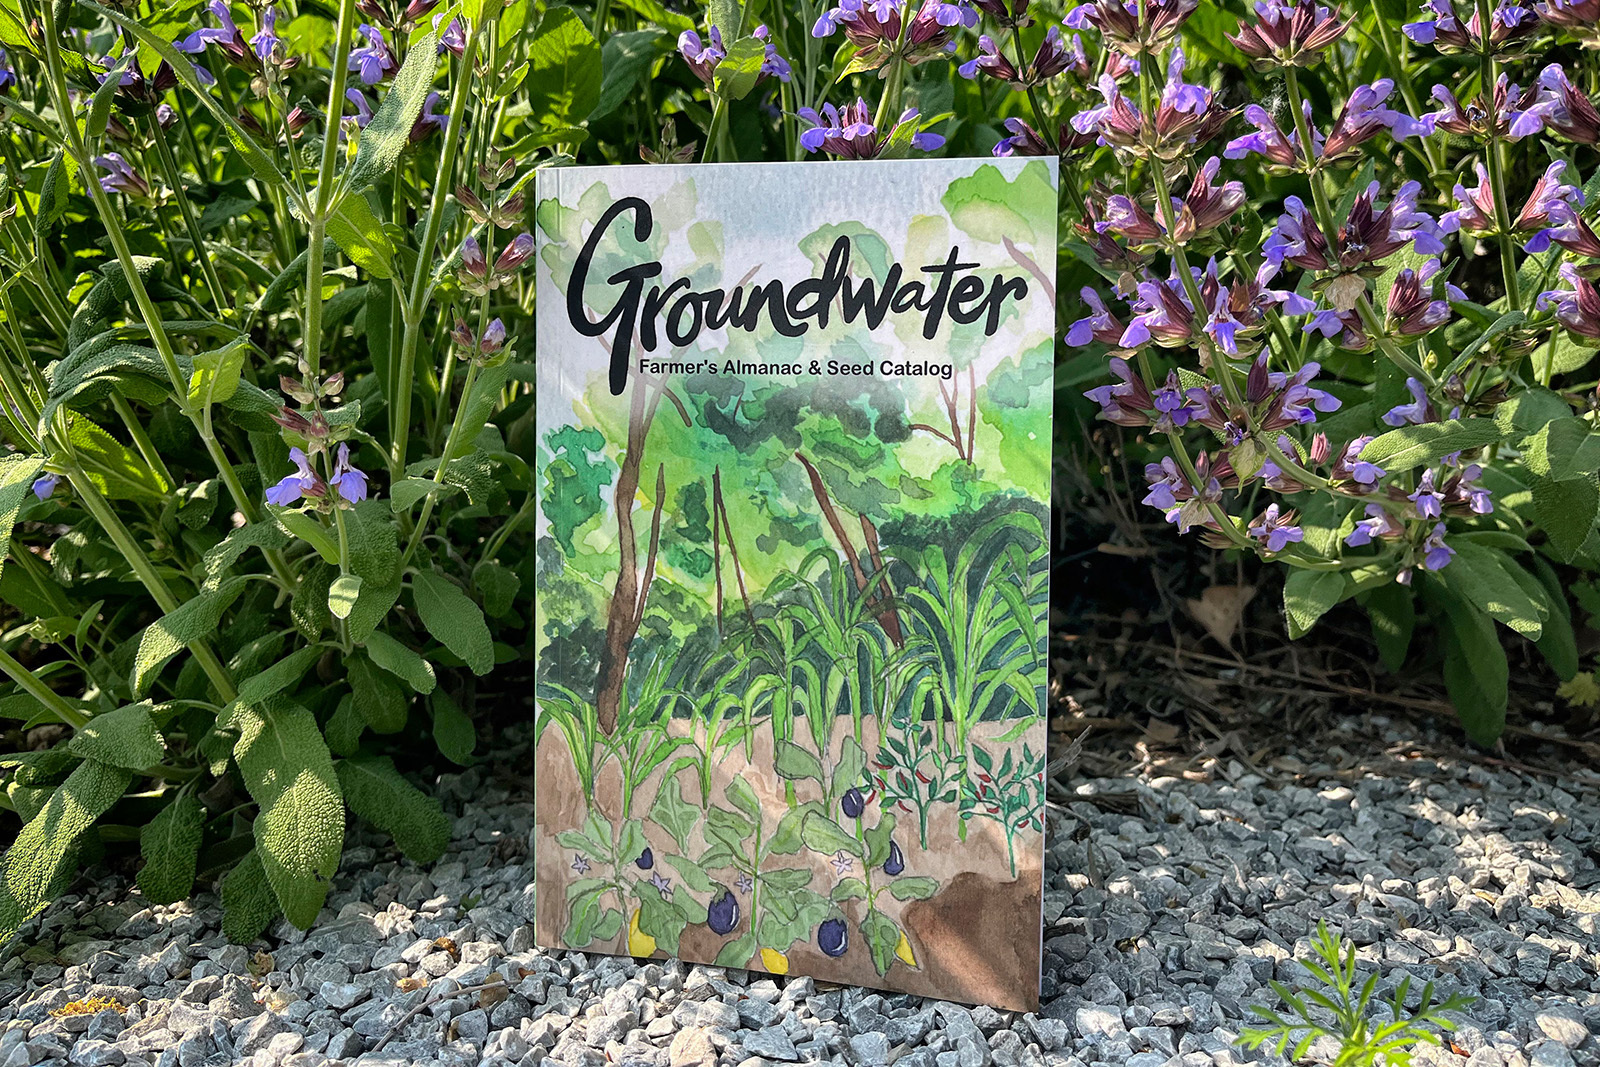 Groundwater almanac book sitting in front of purple sage flowers jpeg